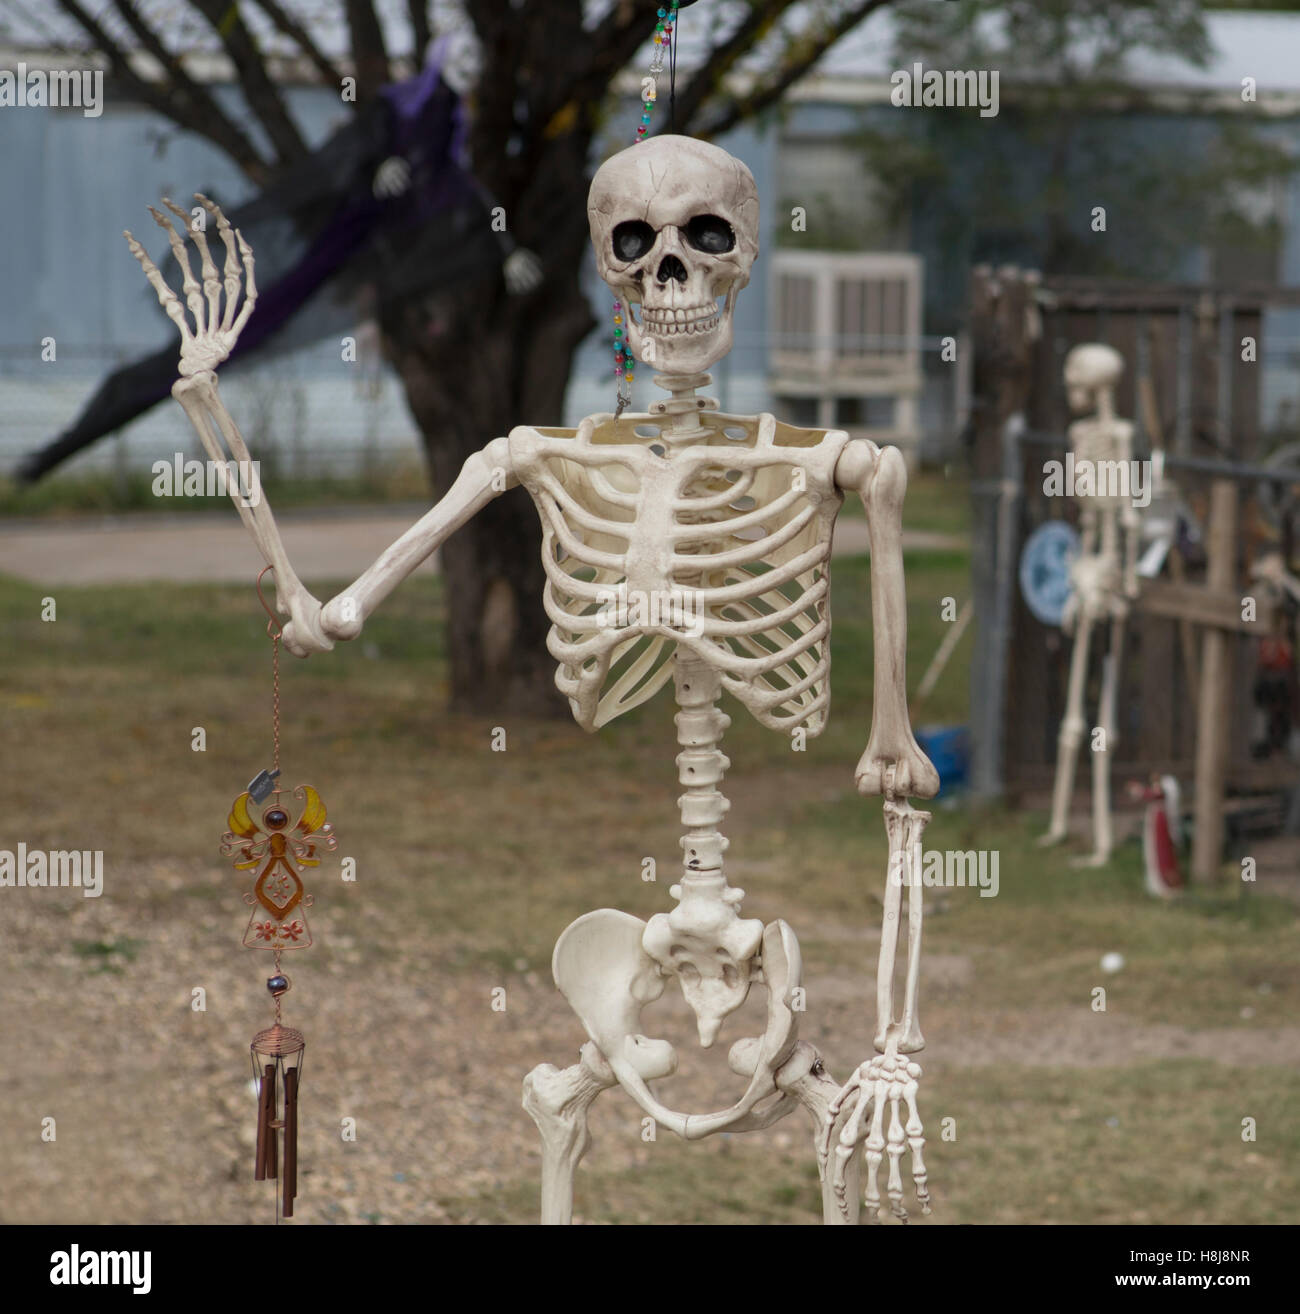 Skeleton used as decorations for Halloween in a small West Texas Town. Stock Photo